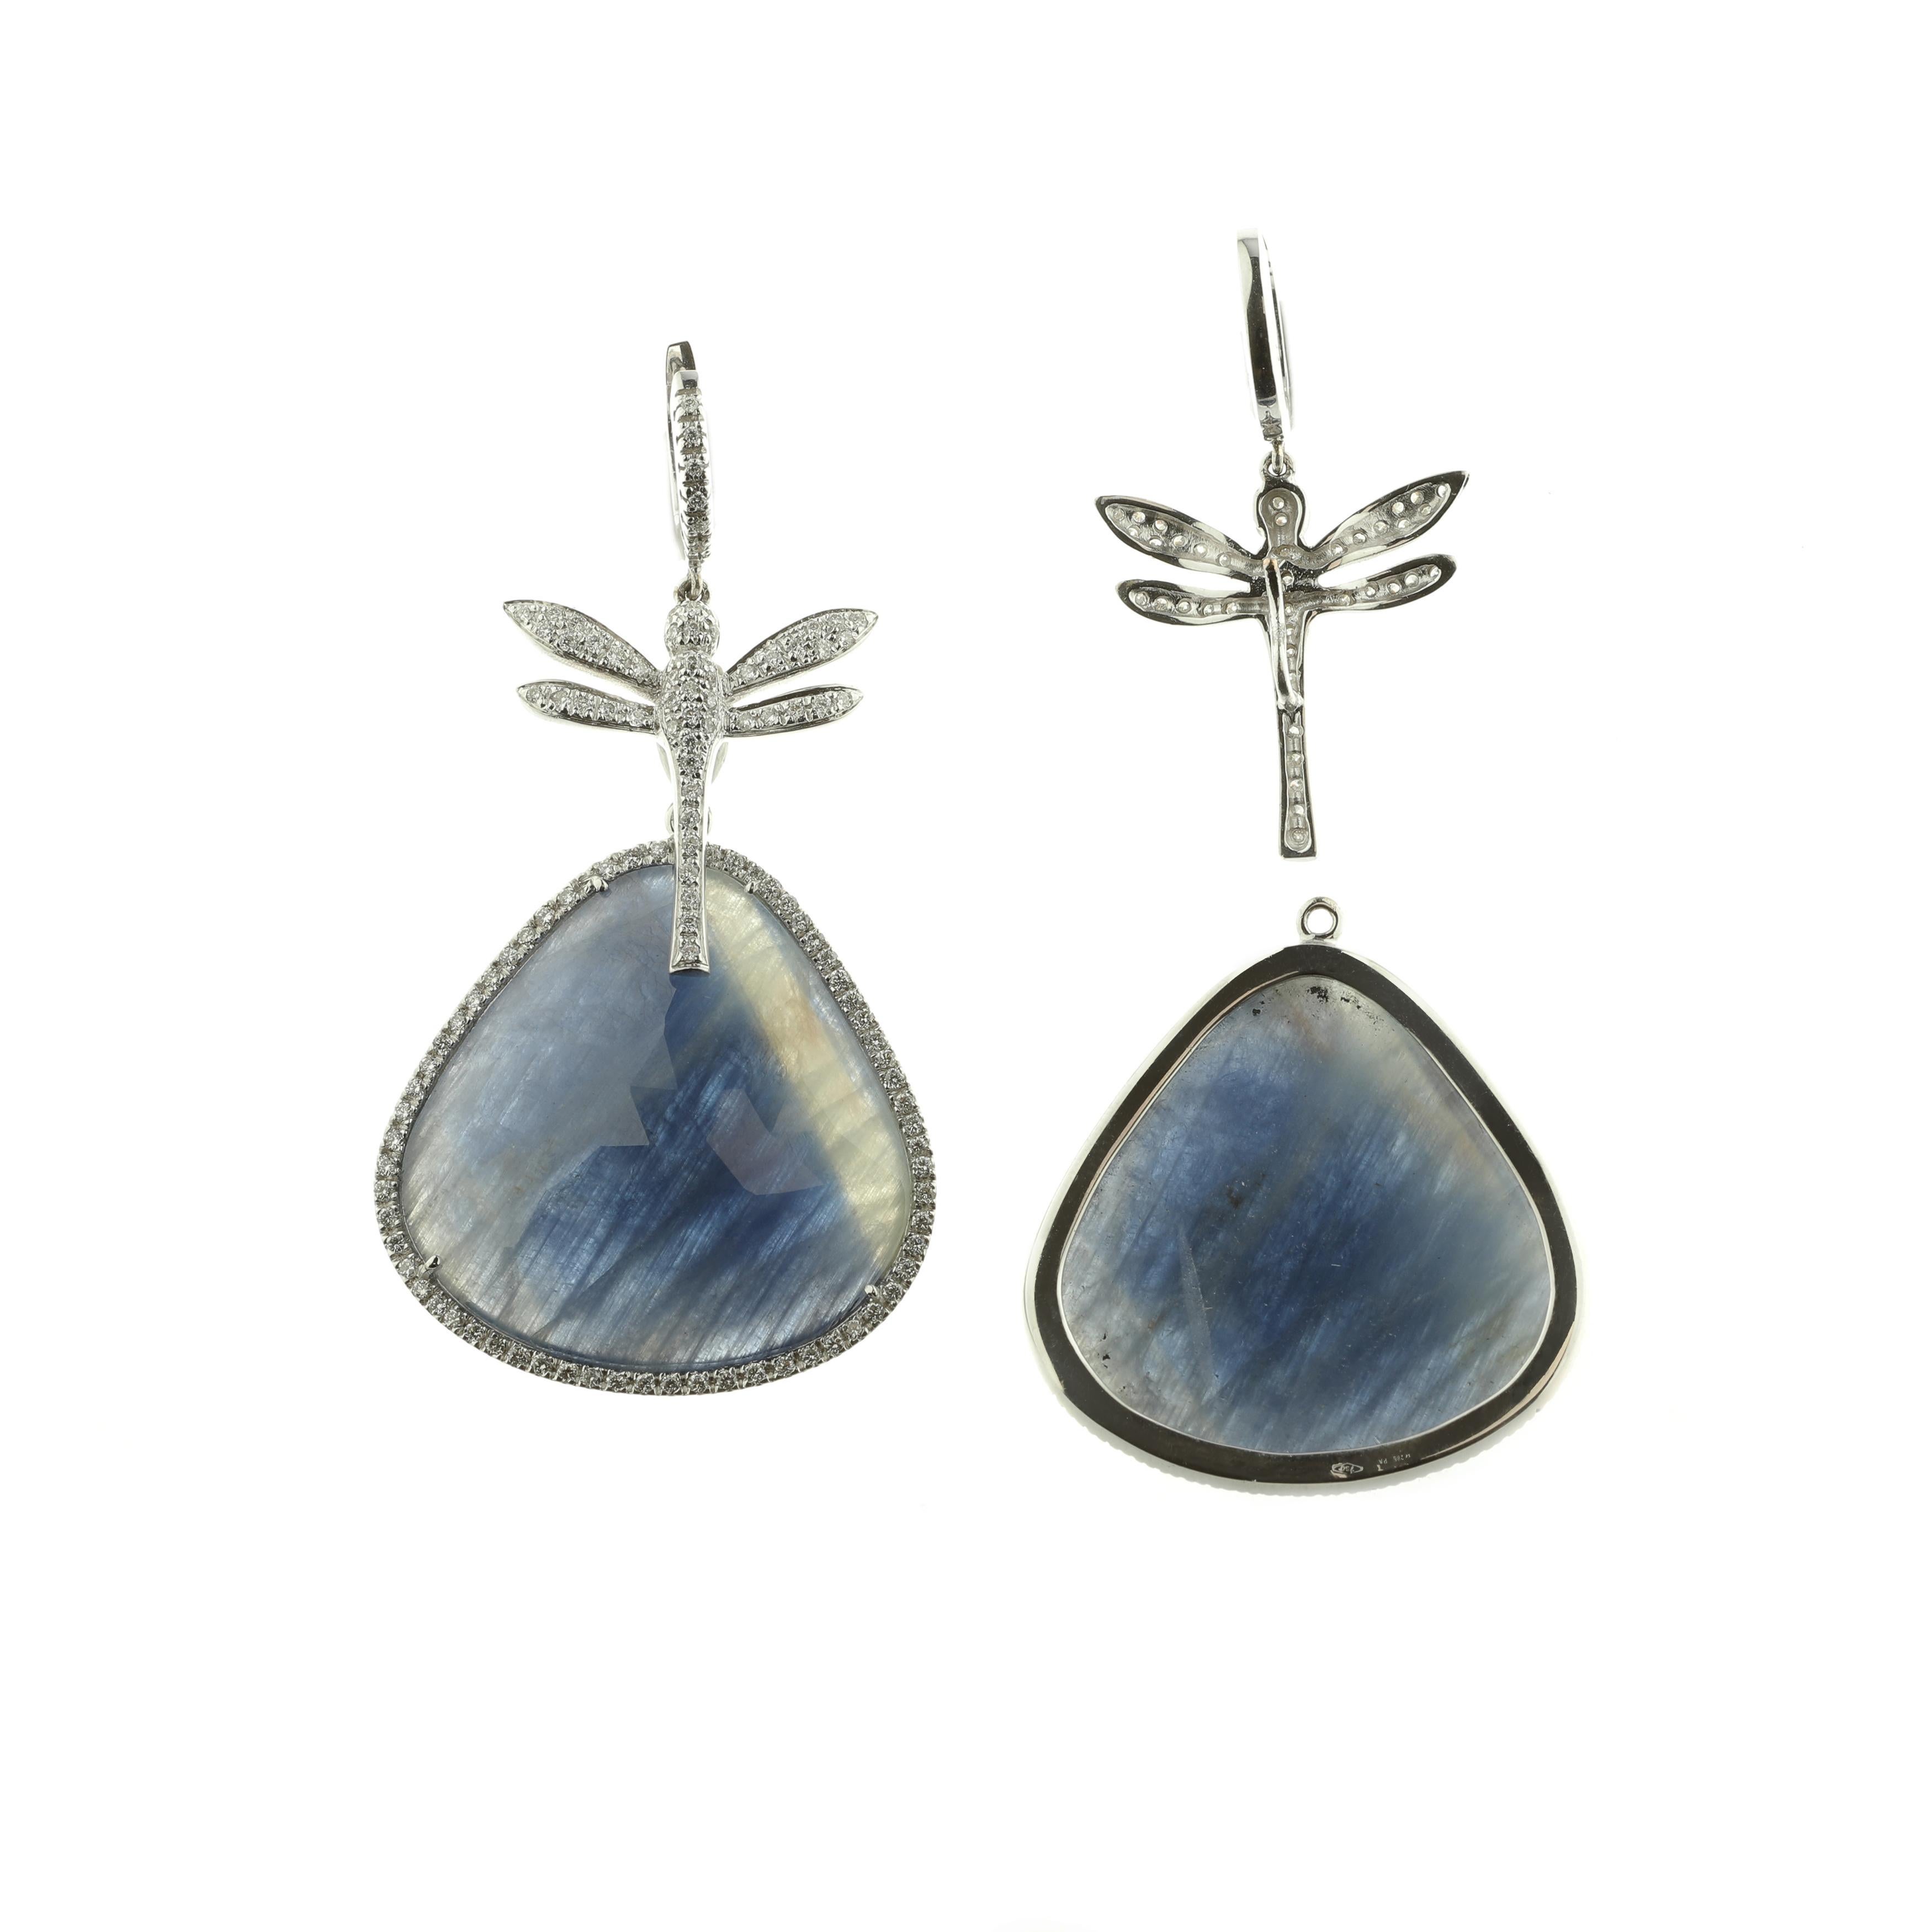 A stunning set of earrings masterfully created entirely by hand feature an 18-karat white gold hoop and dragonfly, both pavé-set with white diamonds. A spectacular, large blue sapphire framed in white diamonds is suspended below (62 carats total).